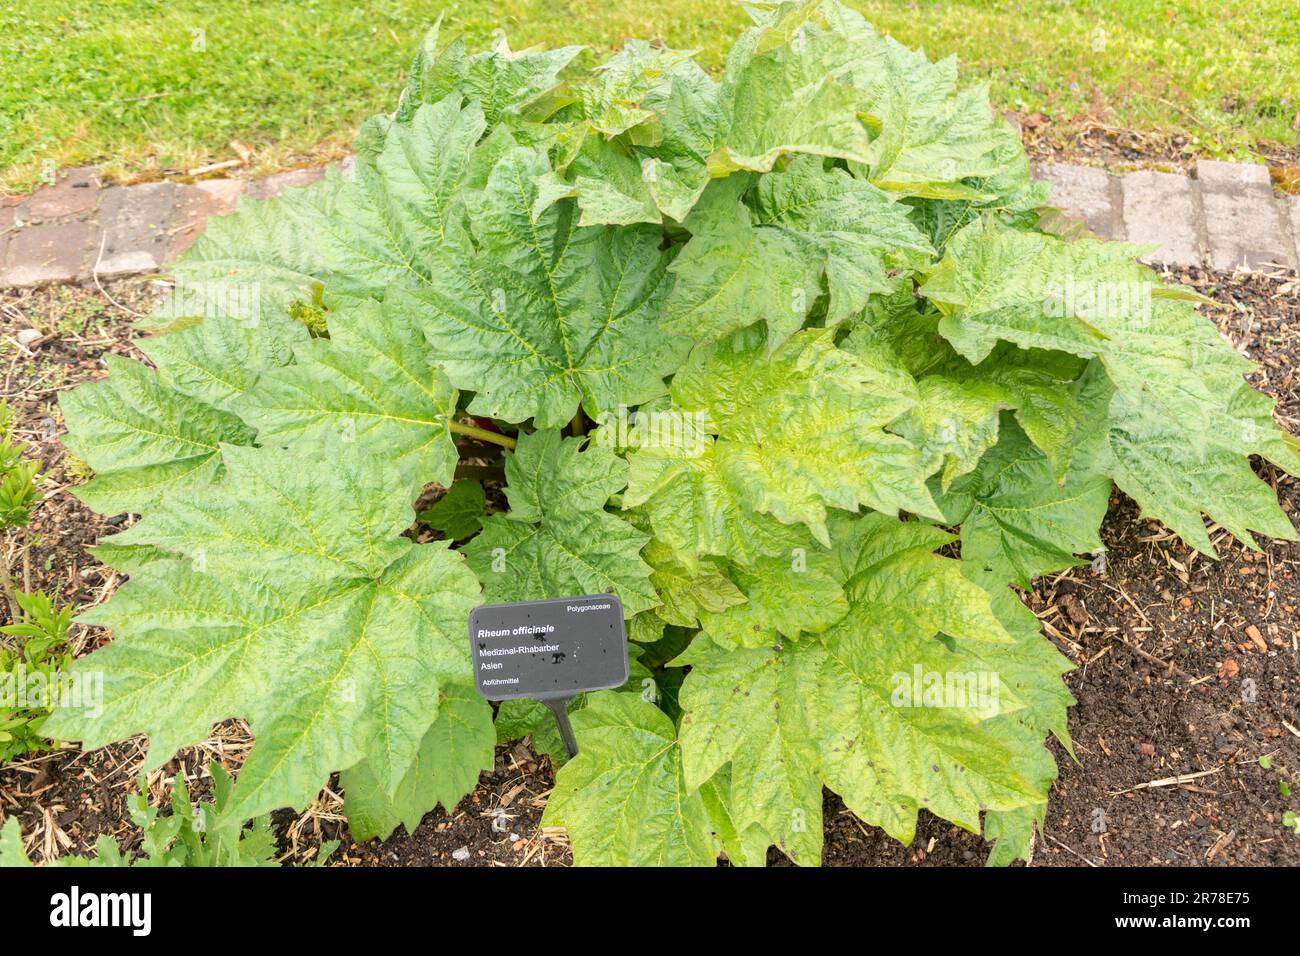 Rheum officinale hi-res stock images photography - and Alamy